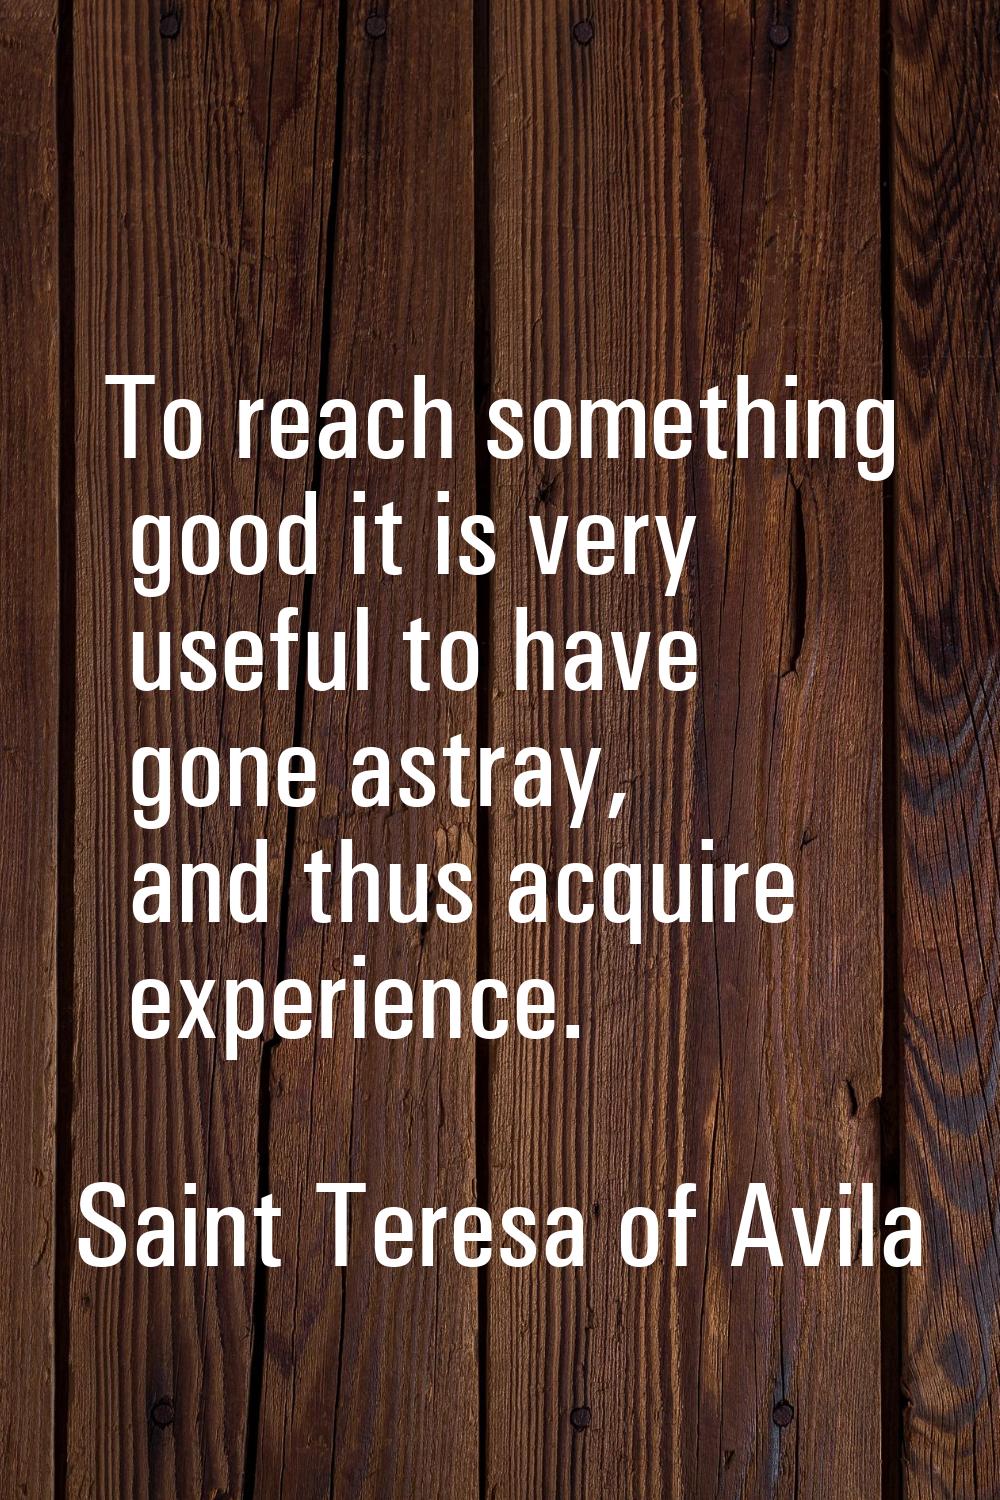 To reach something good it is very useful to have gone astray, and thus acquire experience.